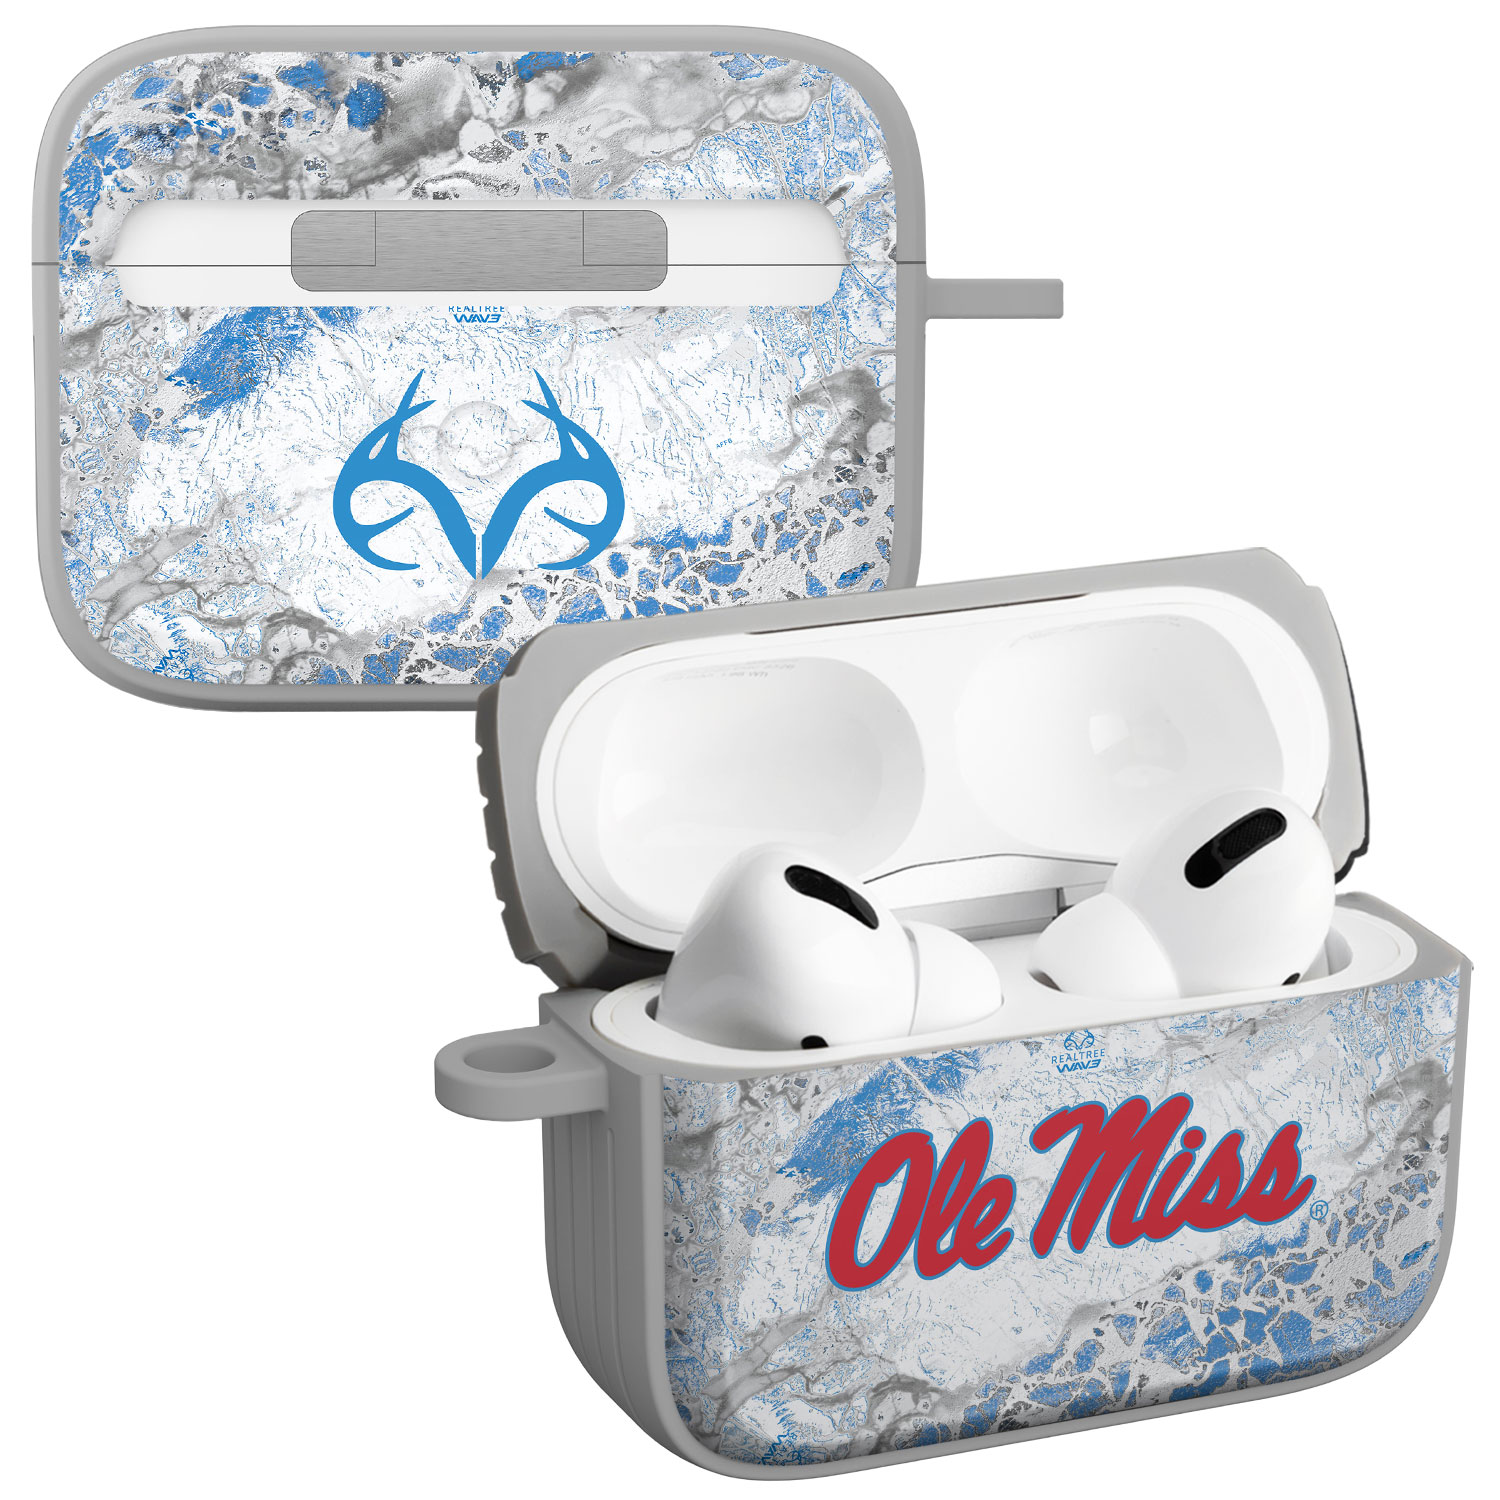 Affinity Bands NCAA Apple AirPods Case Cover